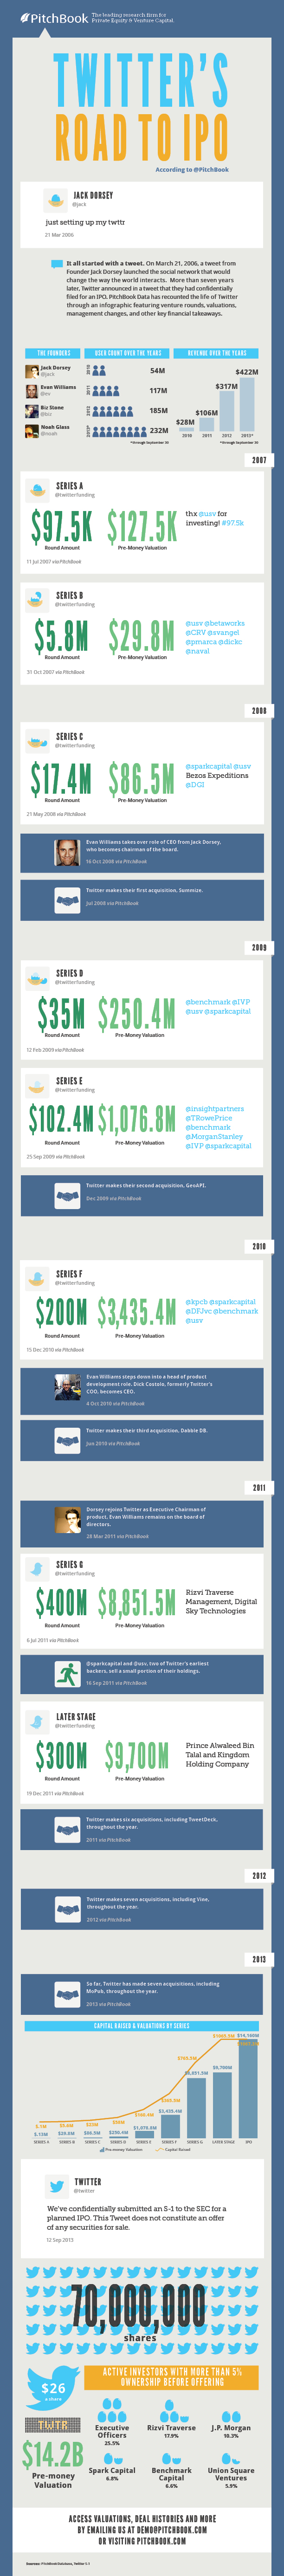 PitchBook's Twitter IPO Infographic